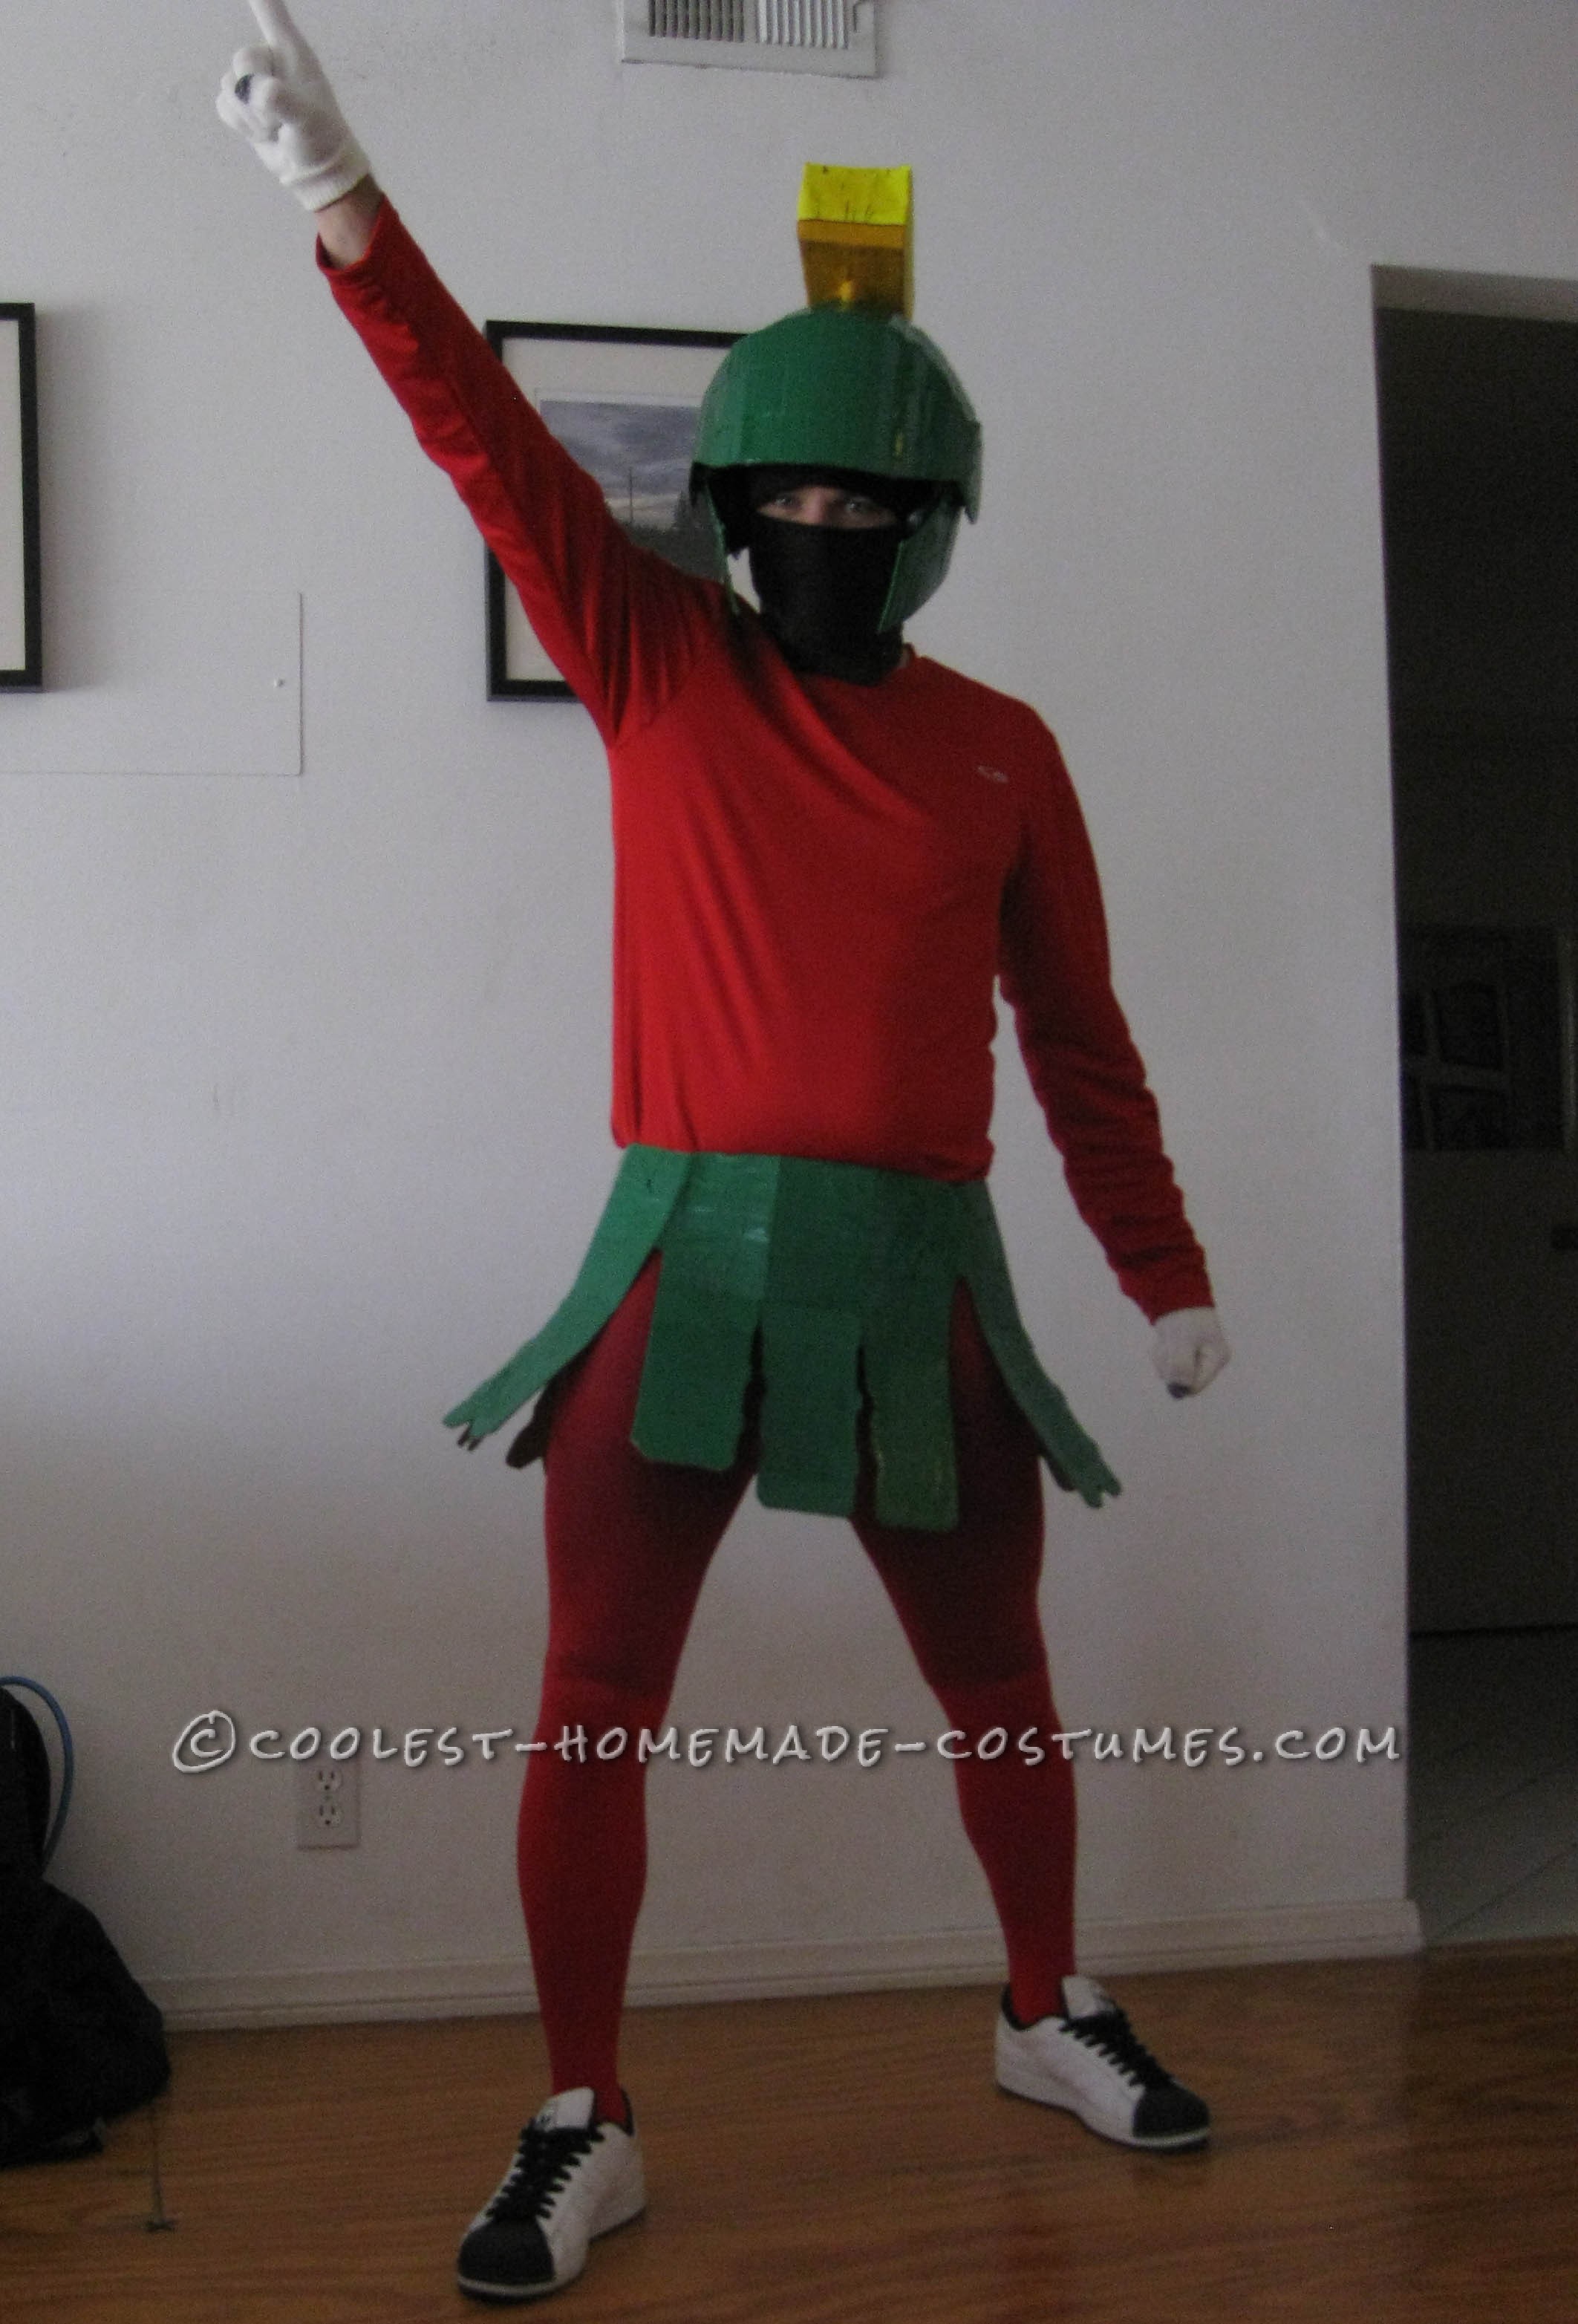 Coolest Marvin the Martian Halloween Costume for Under $20: I am a huge Looney Tunes fan and have been since I was a kid.  I love to think of offbeat characters to be for Halloween, especially ones that are ea